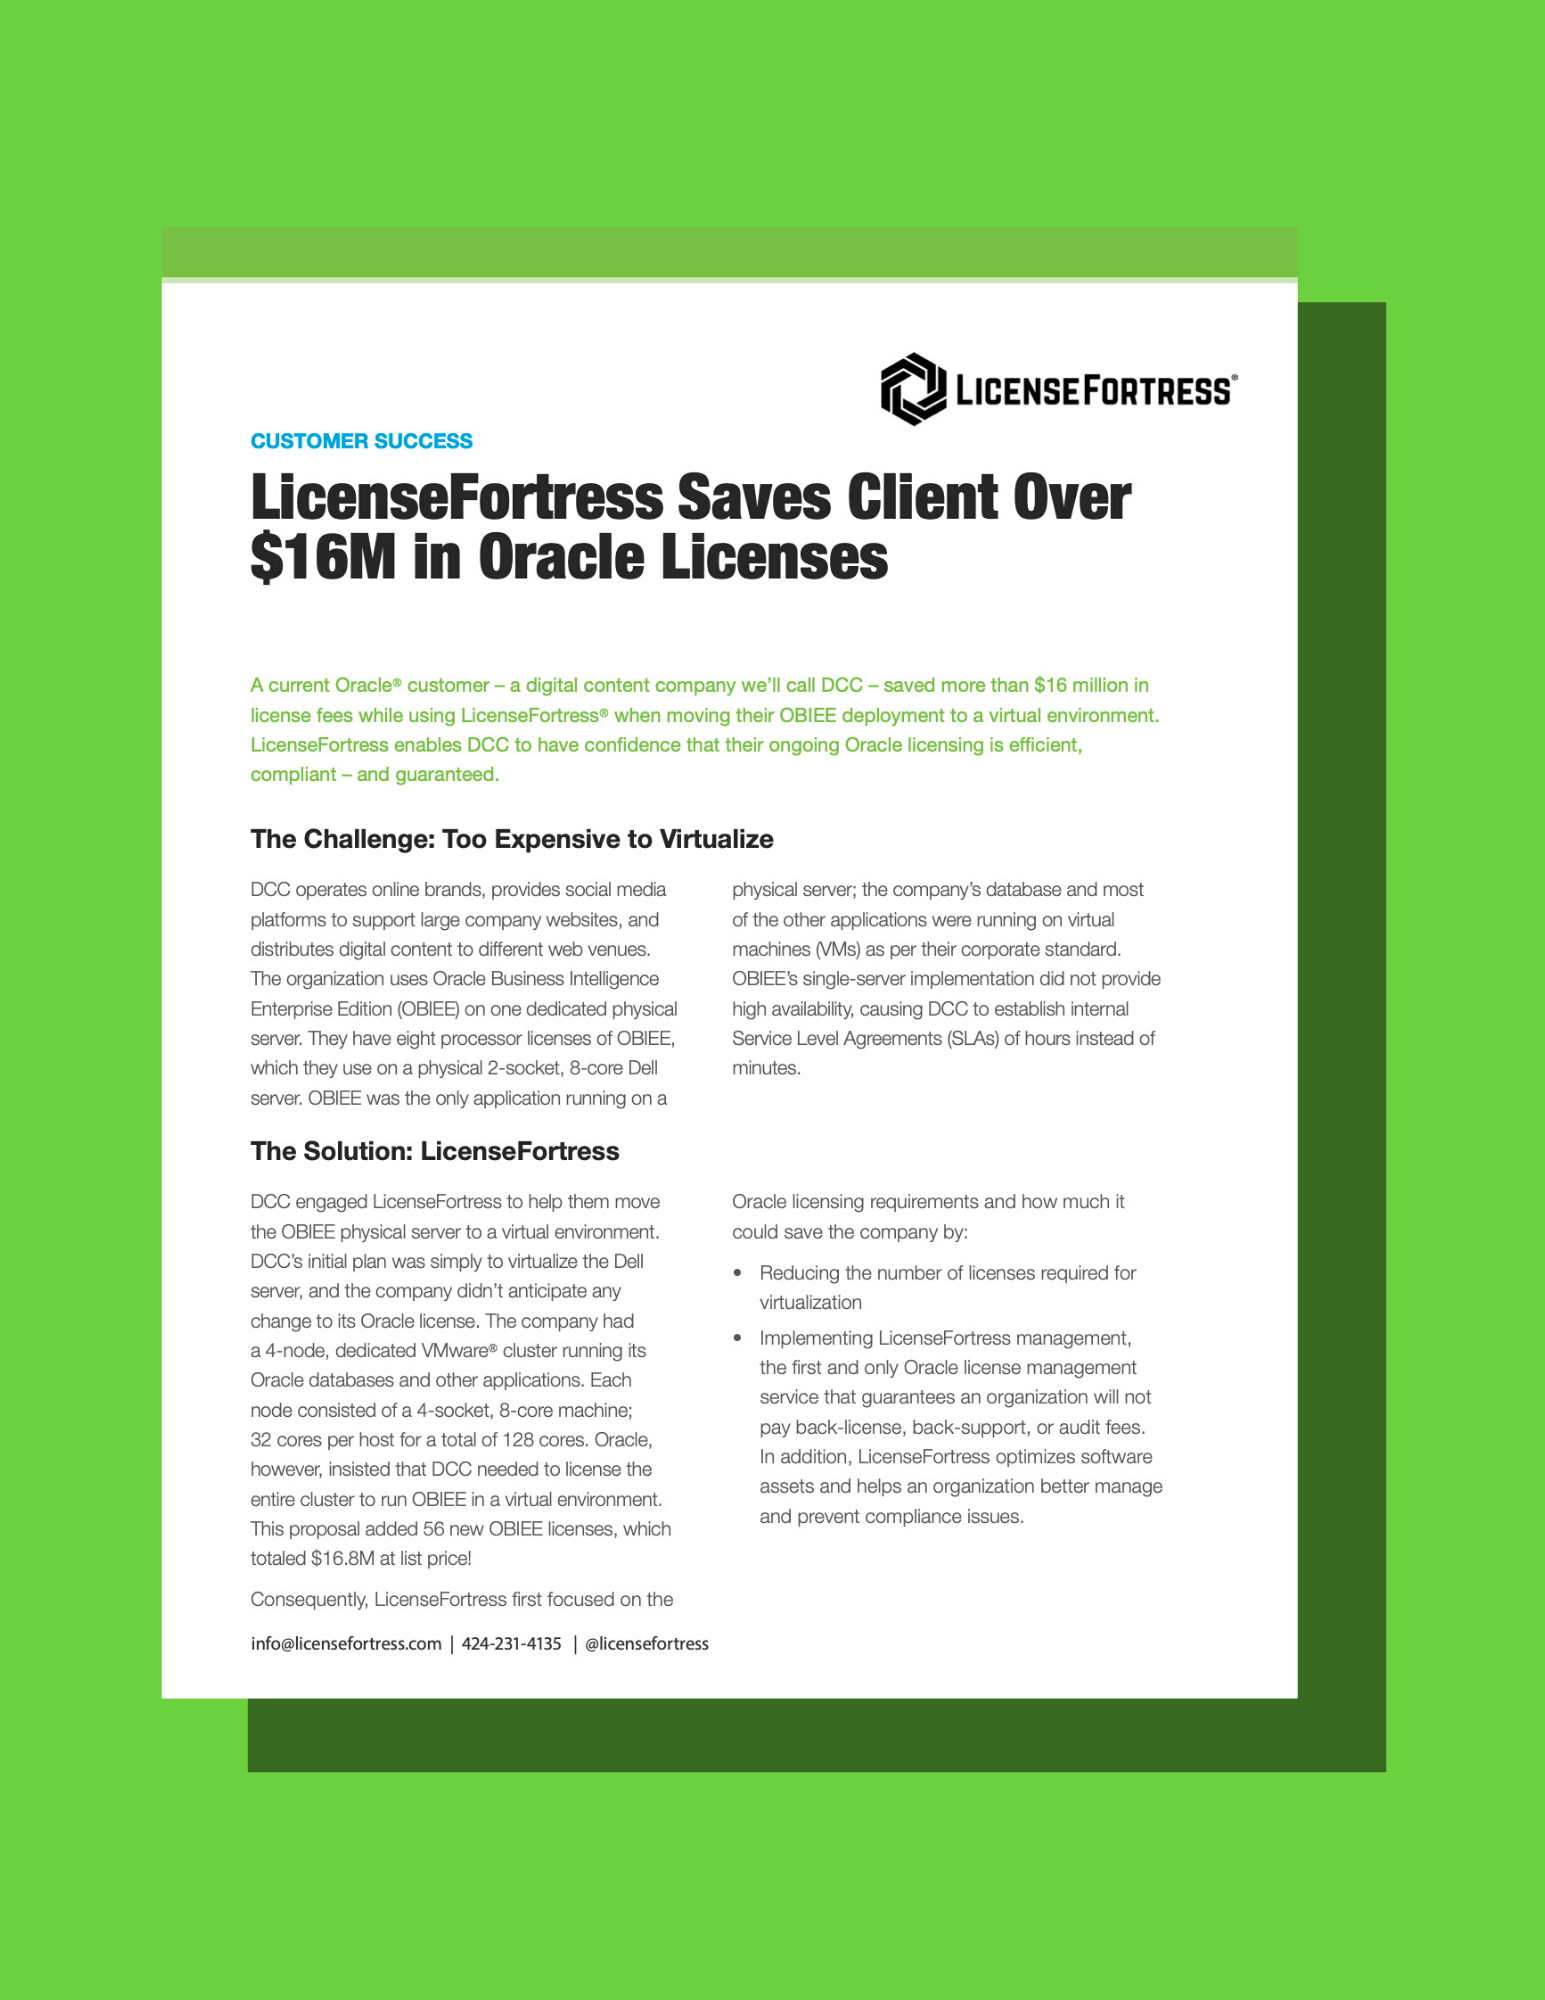 LicenseFortress Saves Client Over $16M in Oracle Liecenses